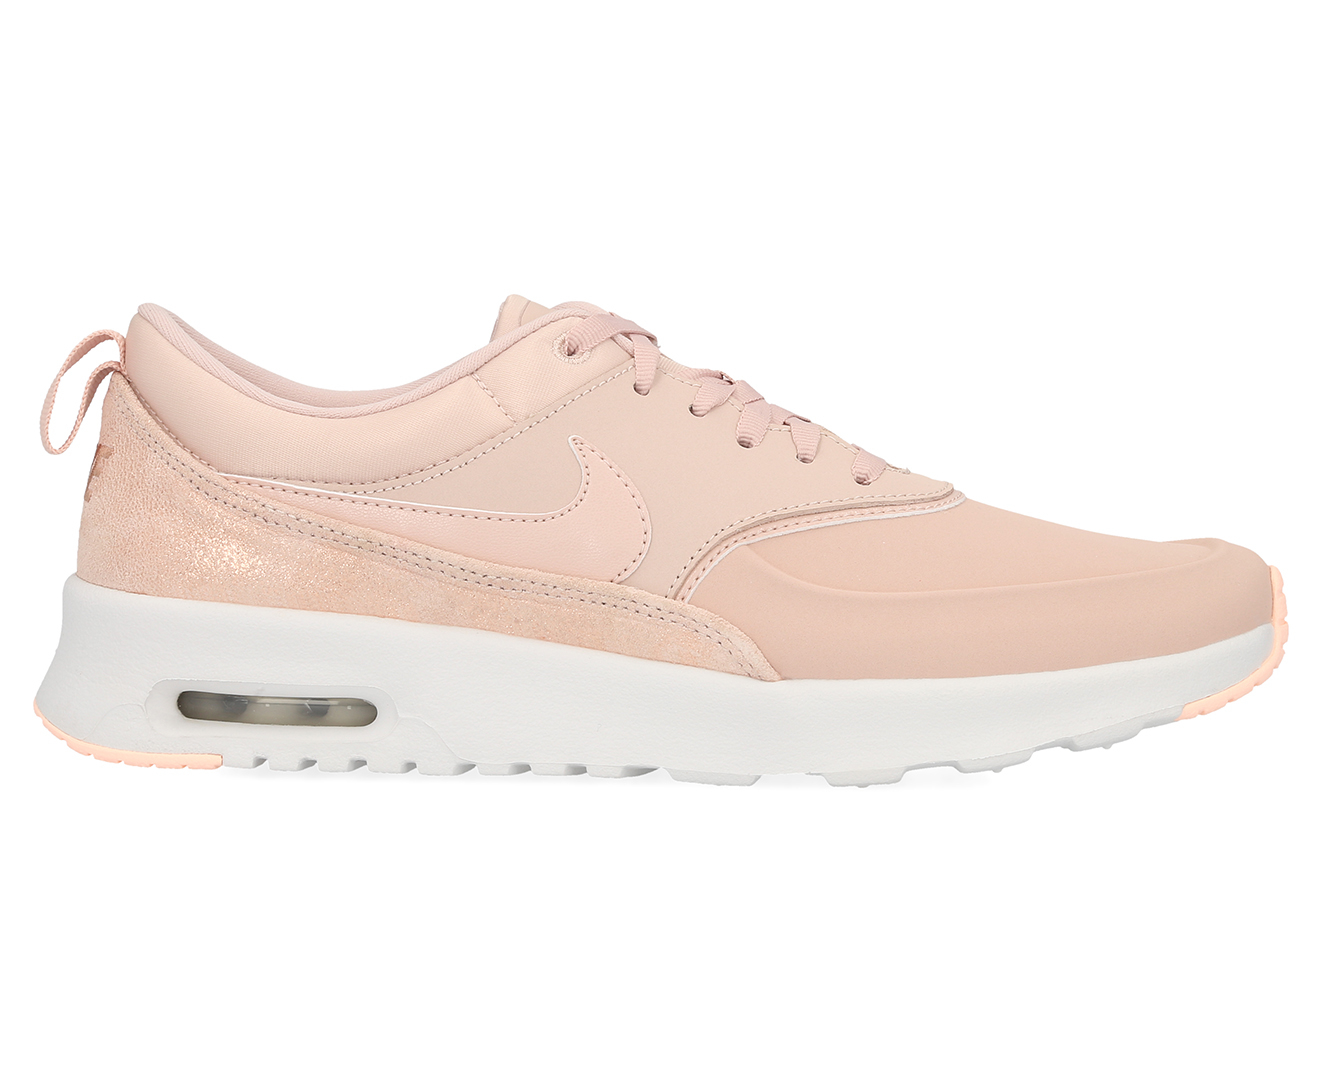 air max thea particle beige